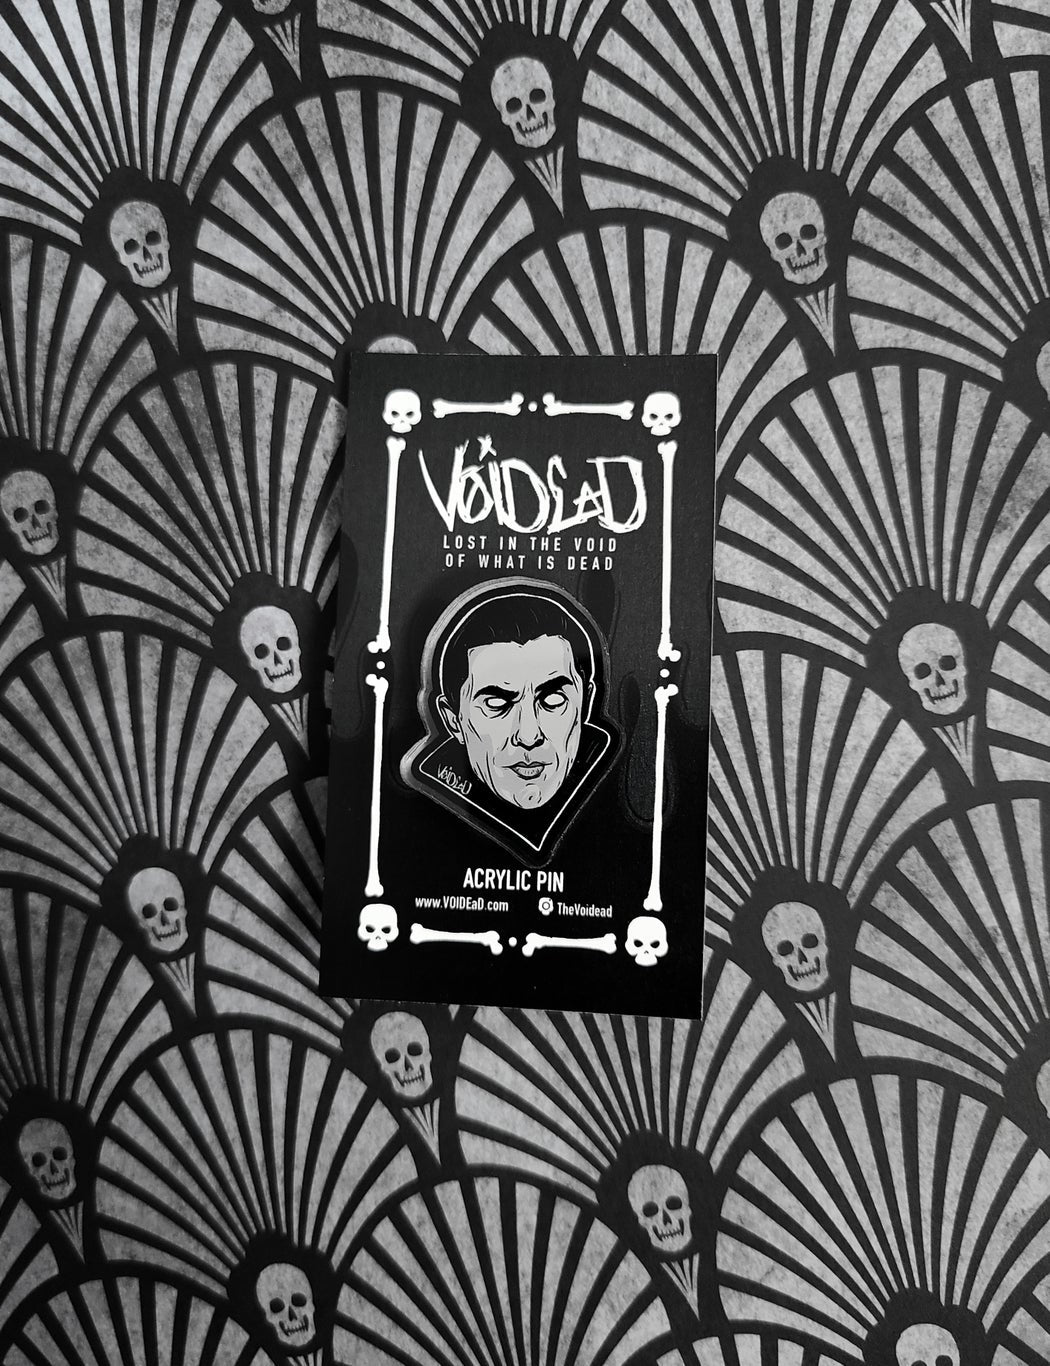 The Count Acrylic Pin By VOIDEaD